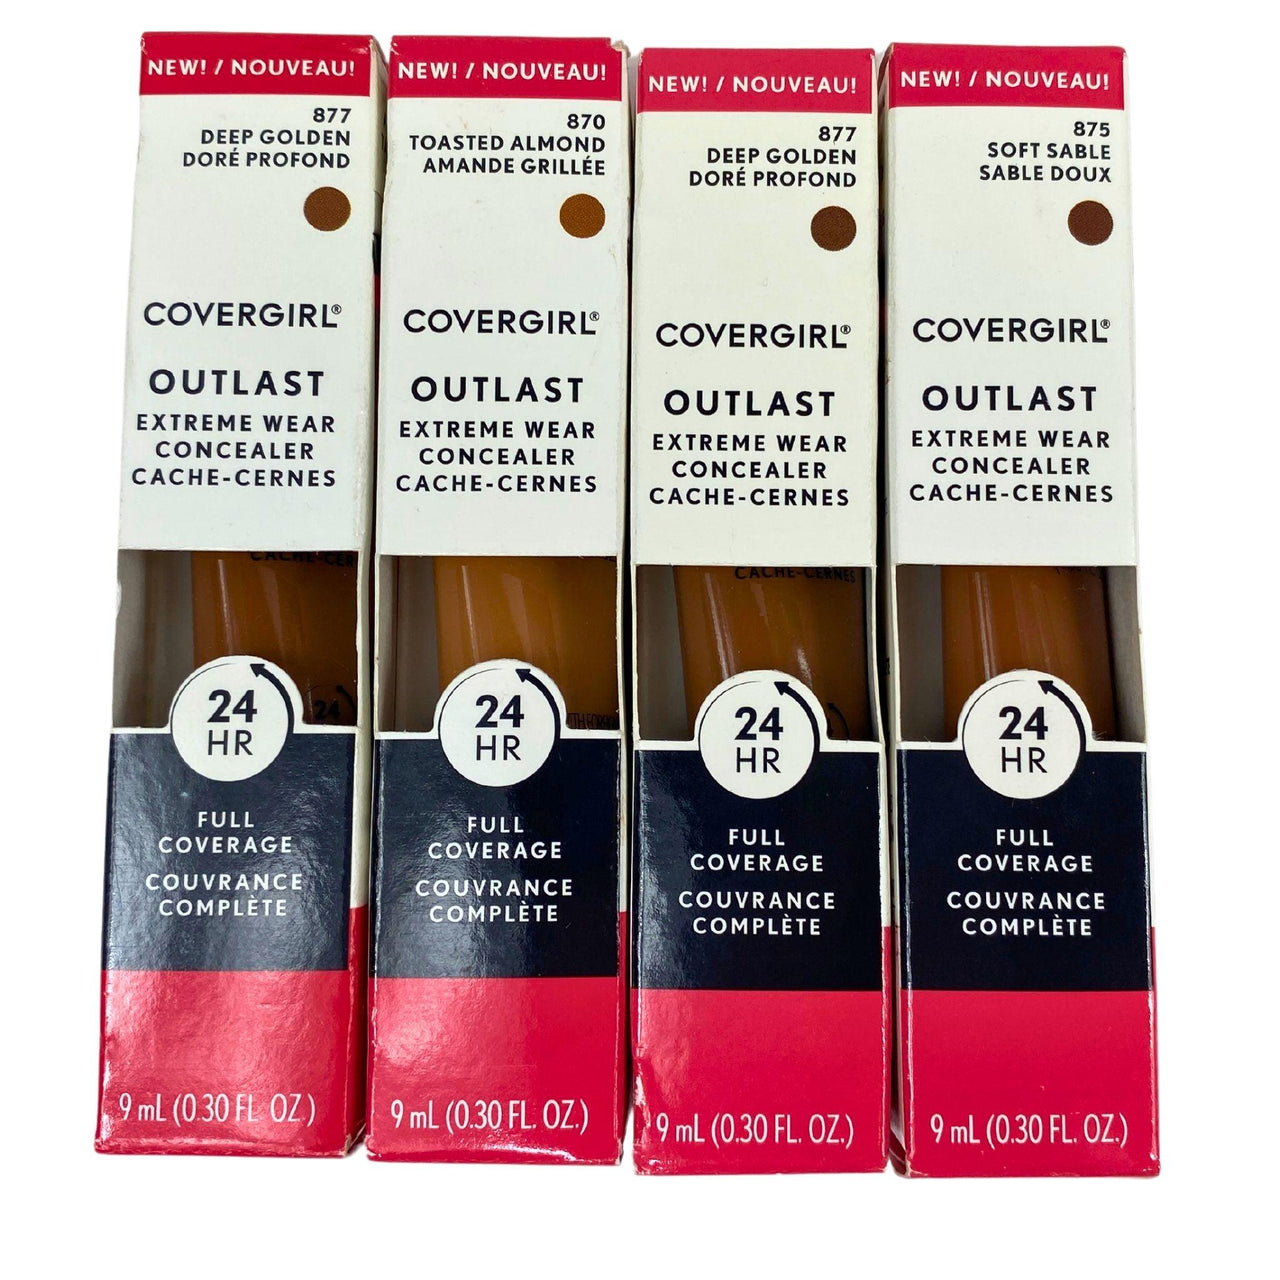 Covergirl Outlast Extreme Wear Concealer 24HR Full Coverage 0.30OZ (50 Pcs Lot) - Discount Wholesalers Inc